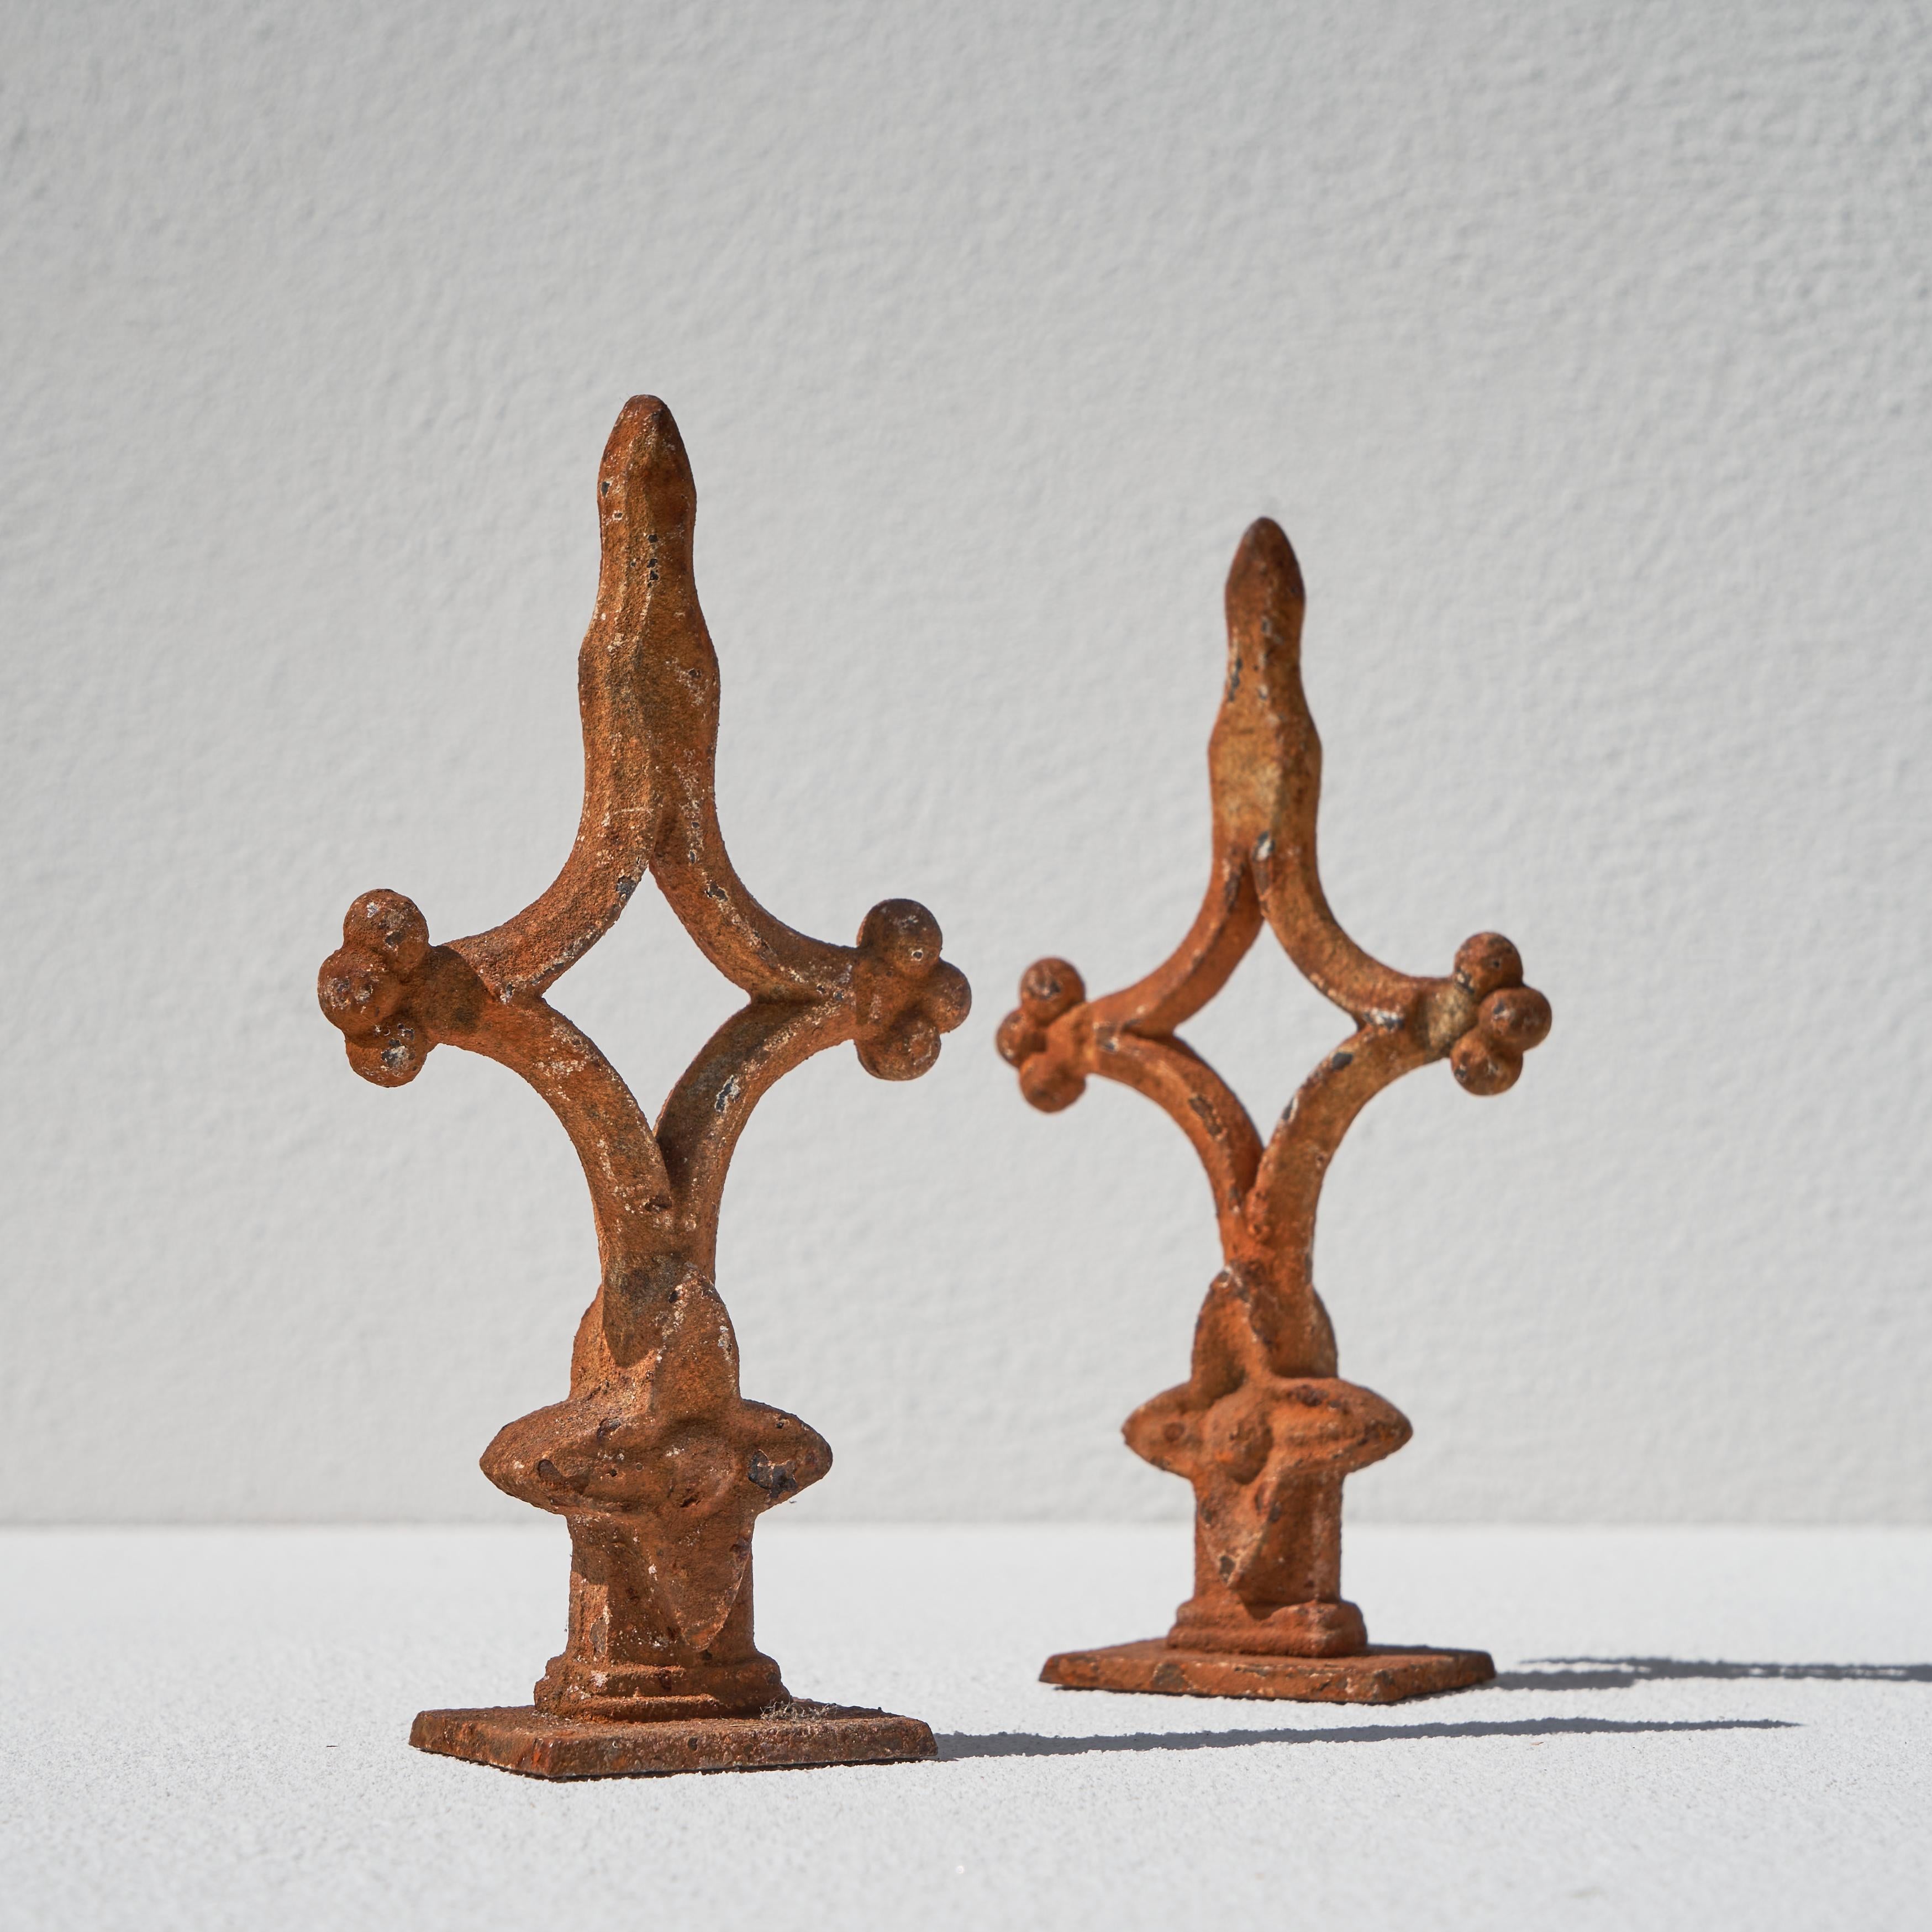 Set of 4 Rusted 19th Century Decorative Finials In Good Condition For Sale In Tilburg, NL